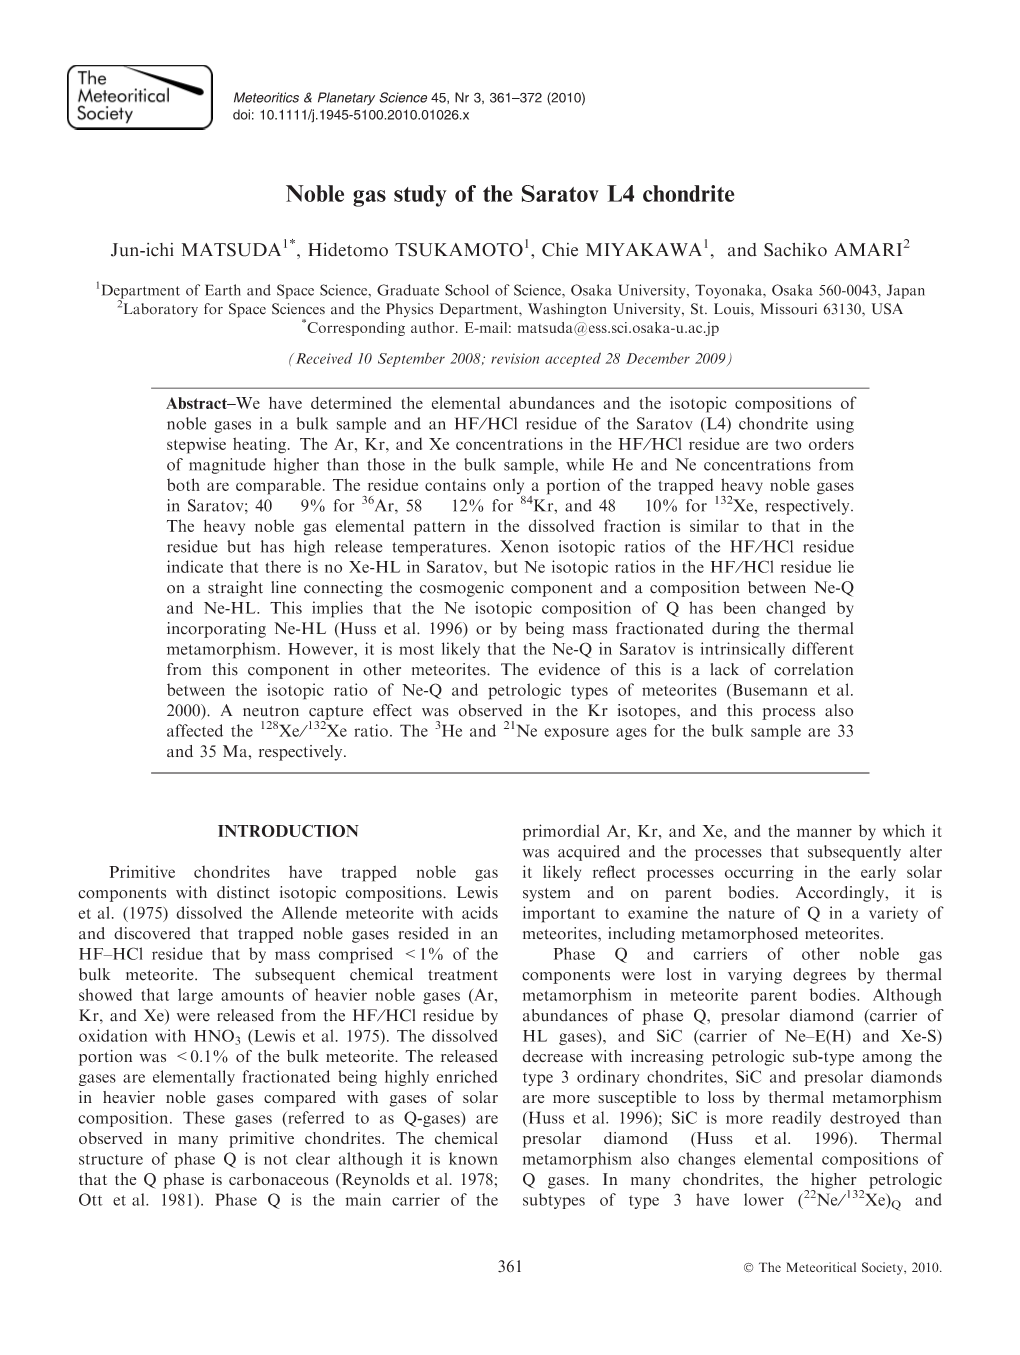 Noble Gas Study of the Saratov L4 Chondrite